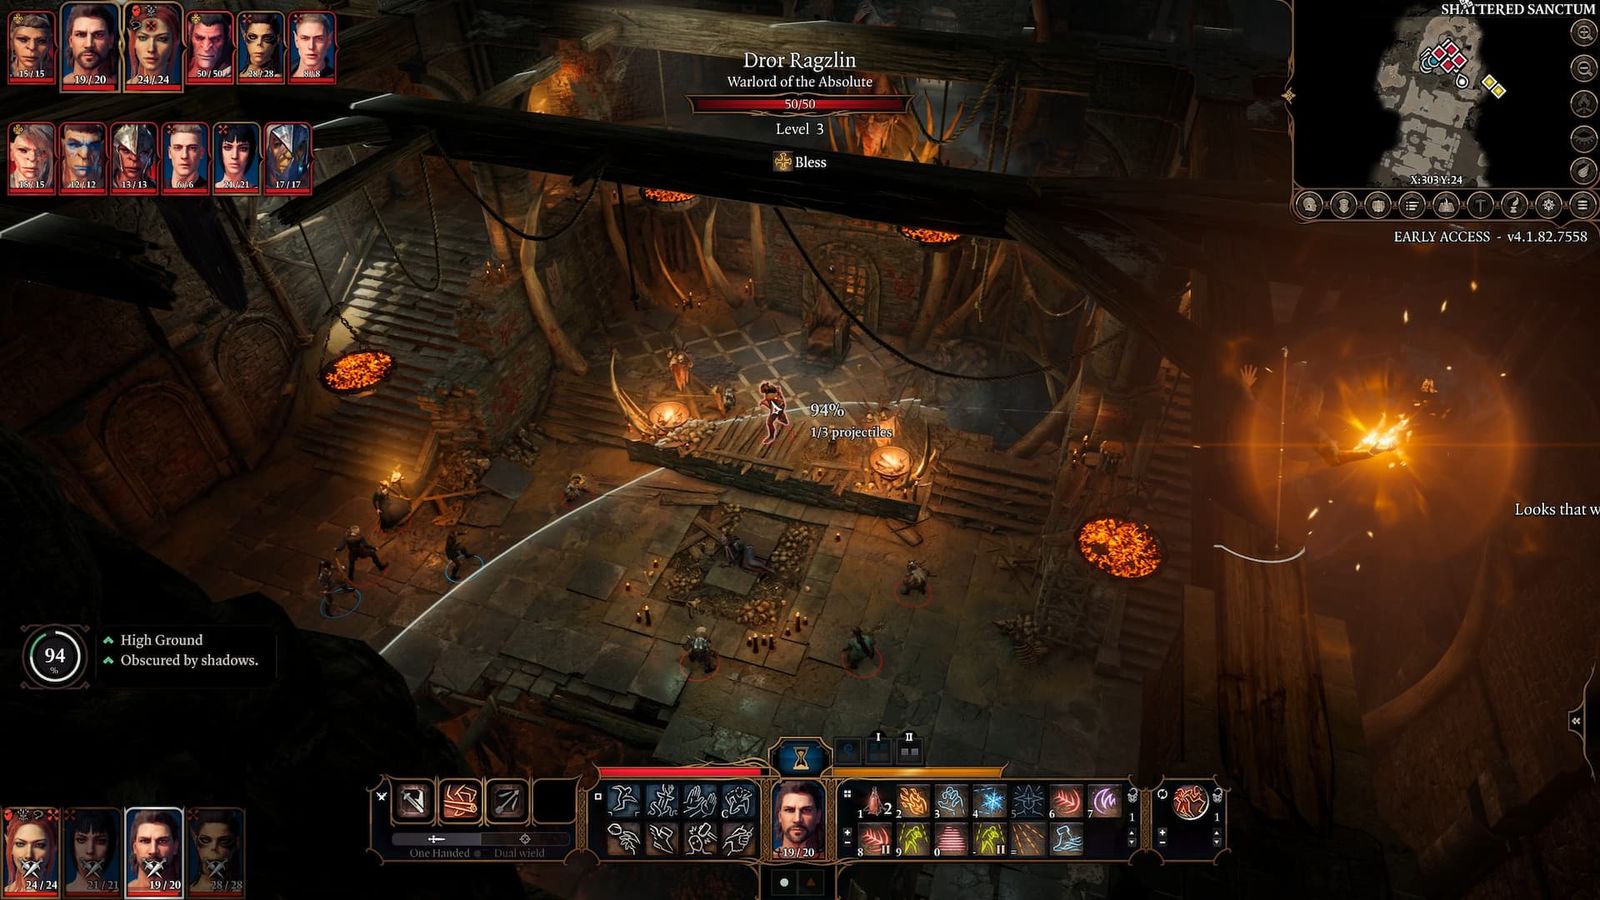 Some characters facing some foes in Baldur's Gate 3